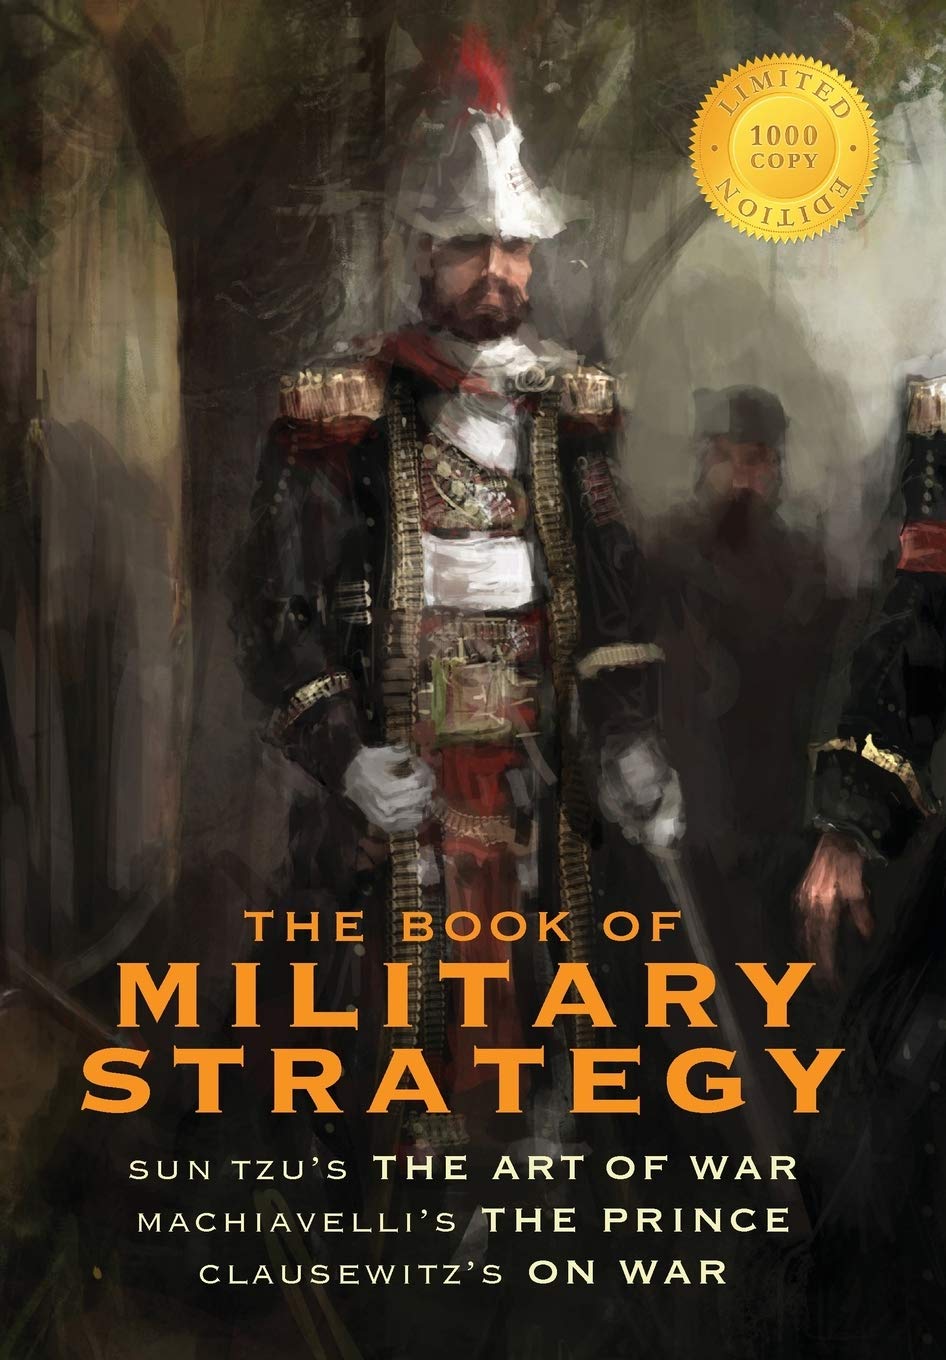 The Book of Military Strategy: Sun Tzu's "The Art of War," Machiavelli's "The Prince," and Clausewitz's "On War"   Niccolò Machiavelli